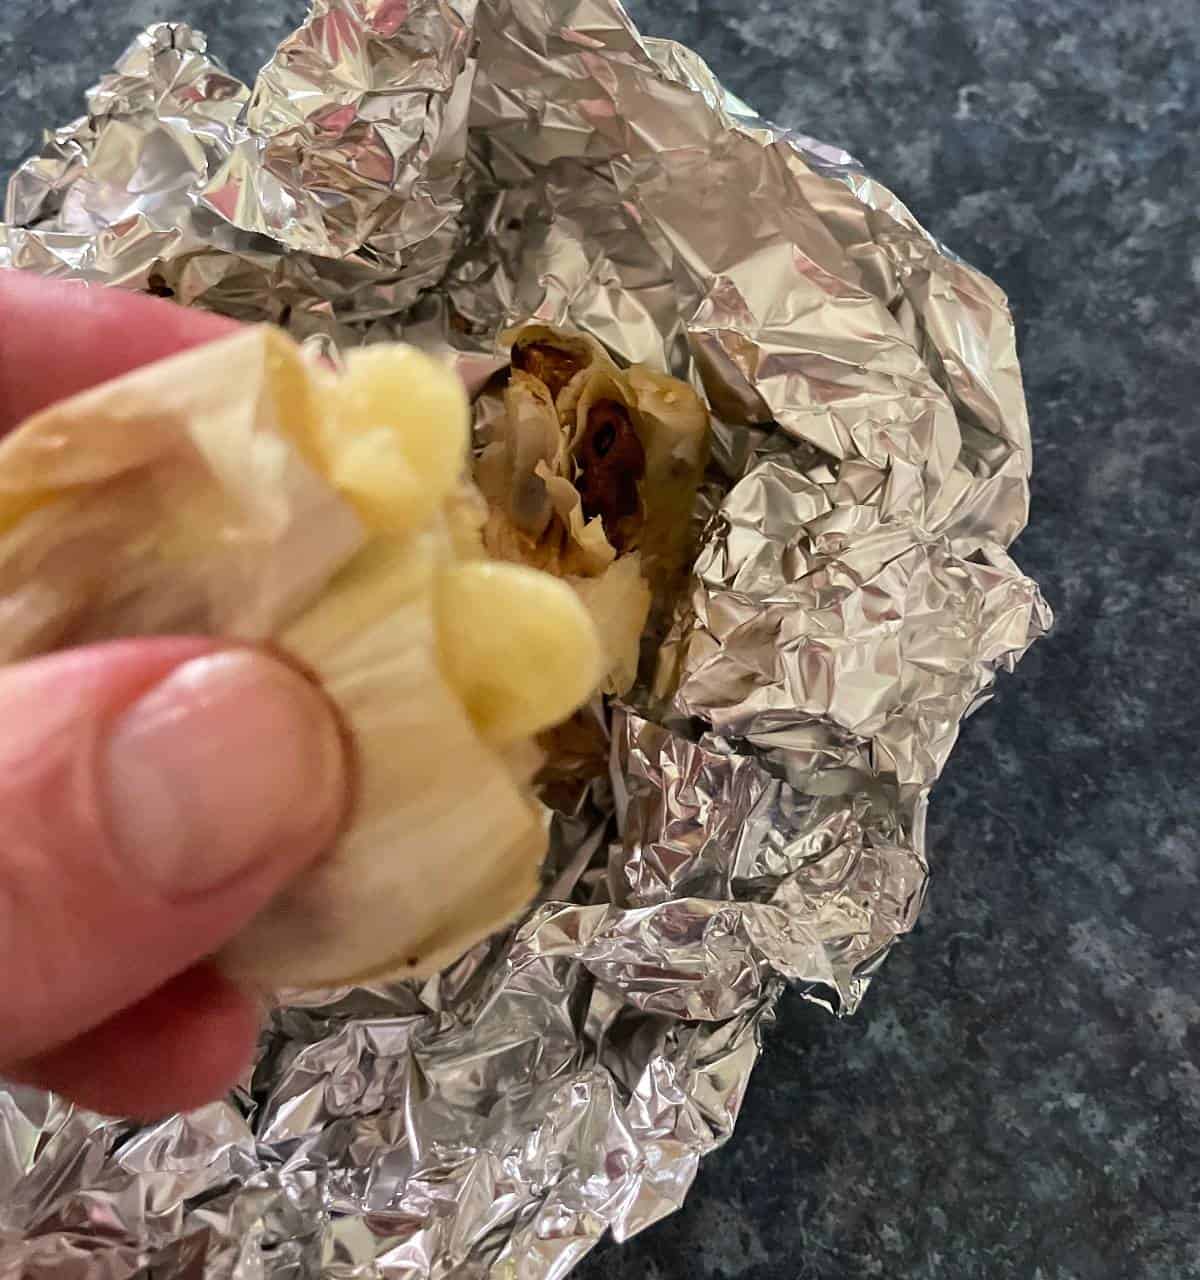 squeezing roasted garlic out of the skin, above the aluminum foil in which it was roasted.